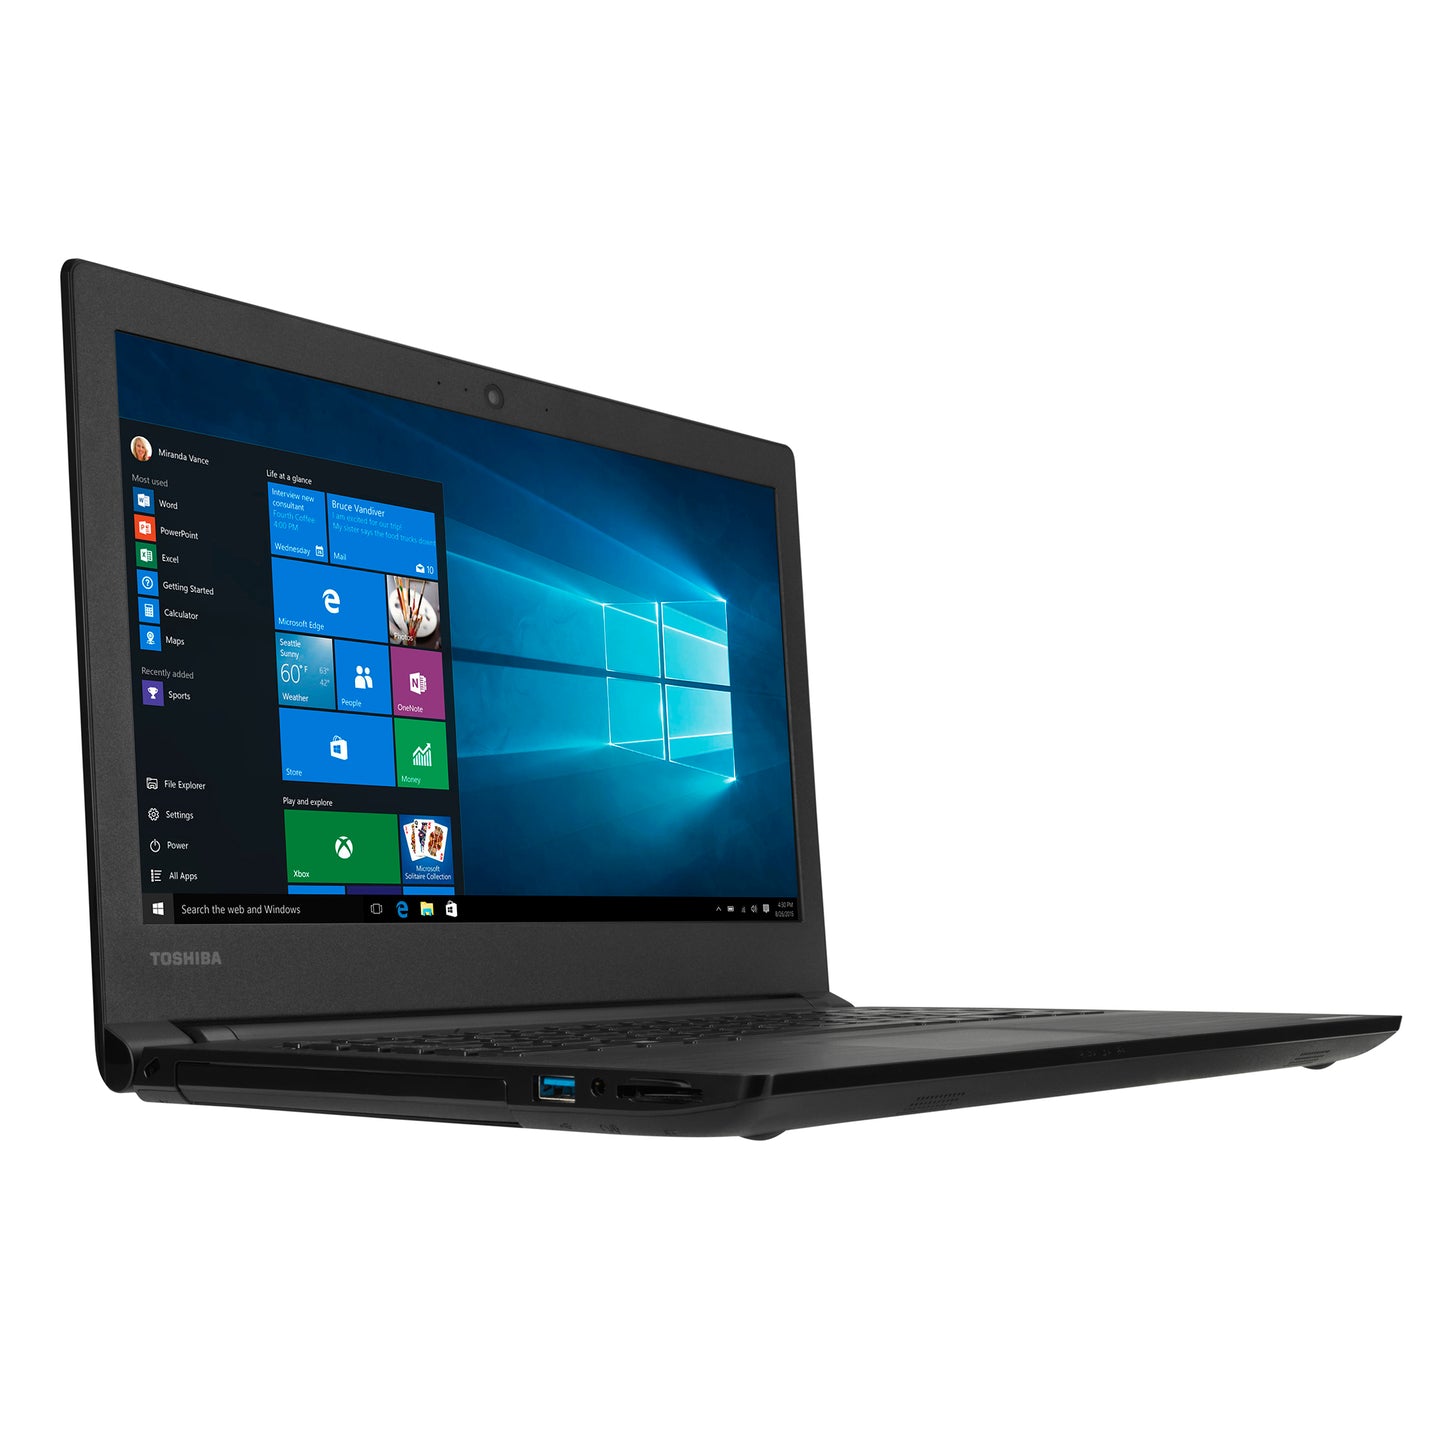 Toshiba Satellite Pro A40-C Core i3-6100u 14" Screen Laptop Offer (Used With Warranty)